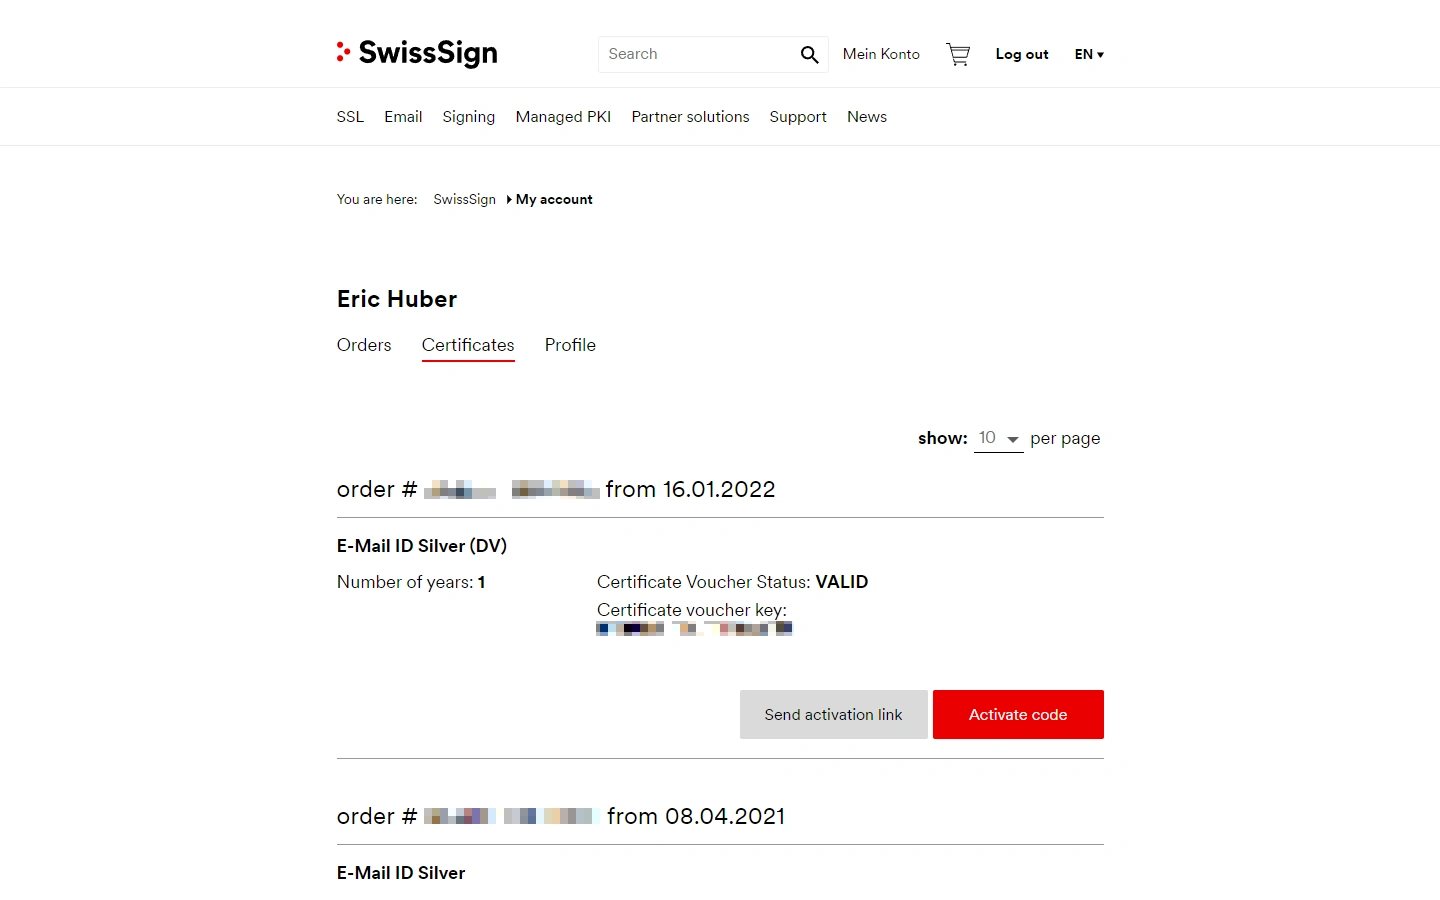 Picture of the "Certificates" tab on the SwissSign website displaying a "Certificate voucher key" and "Activate code" button